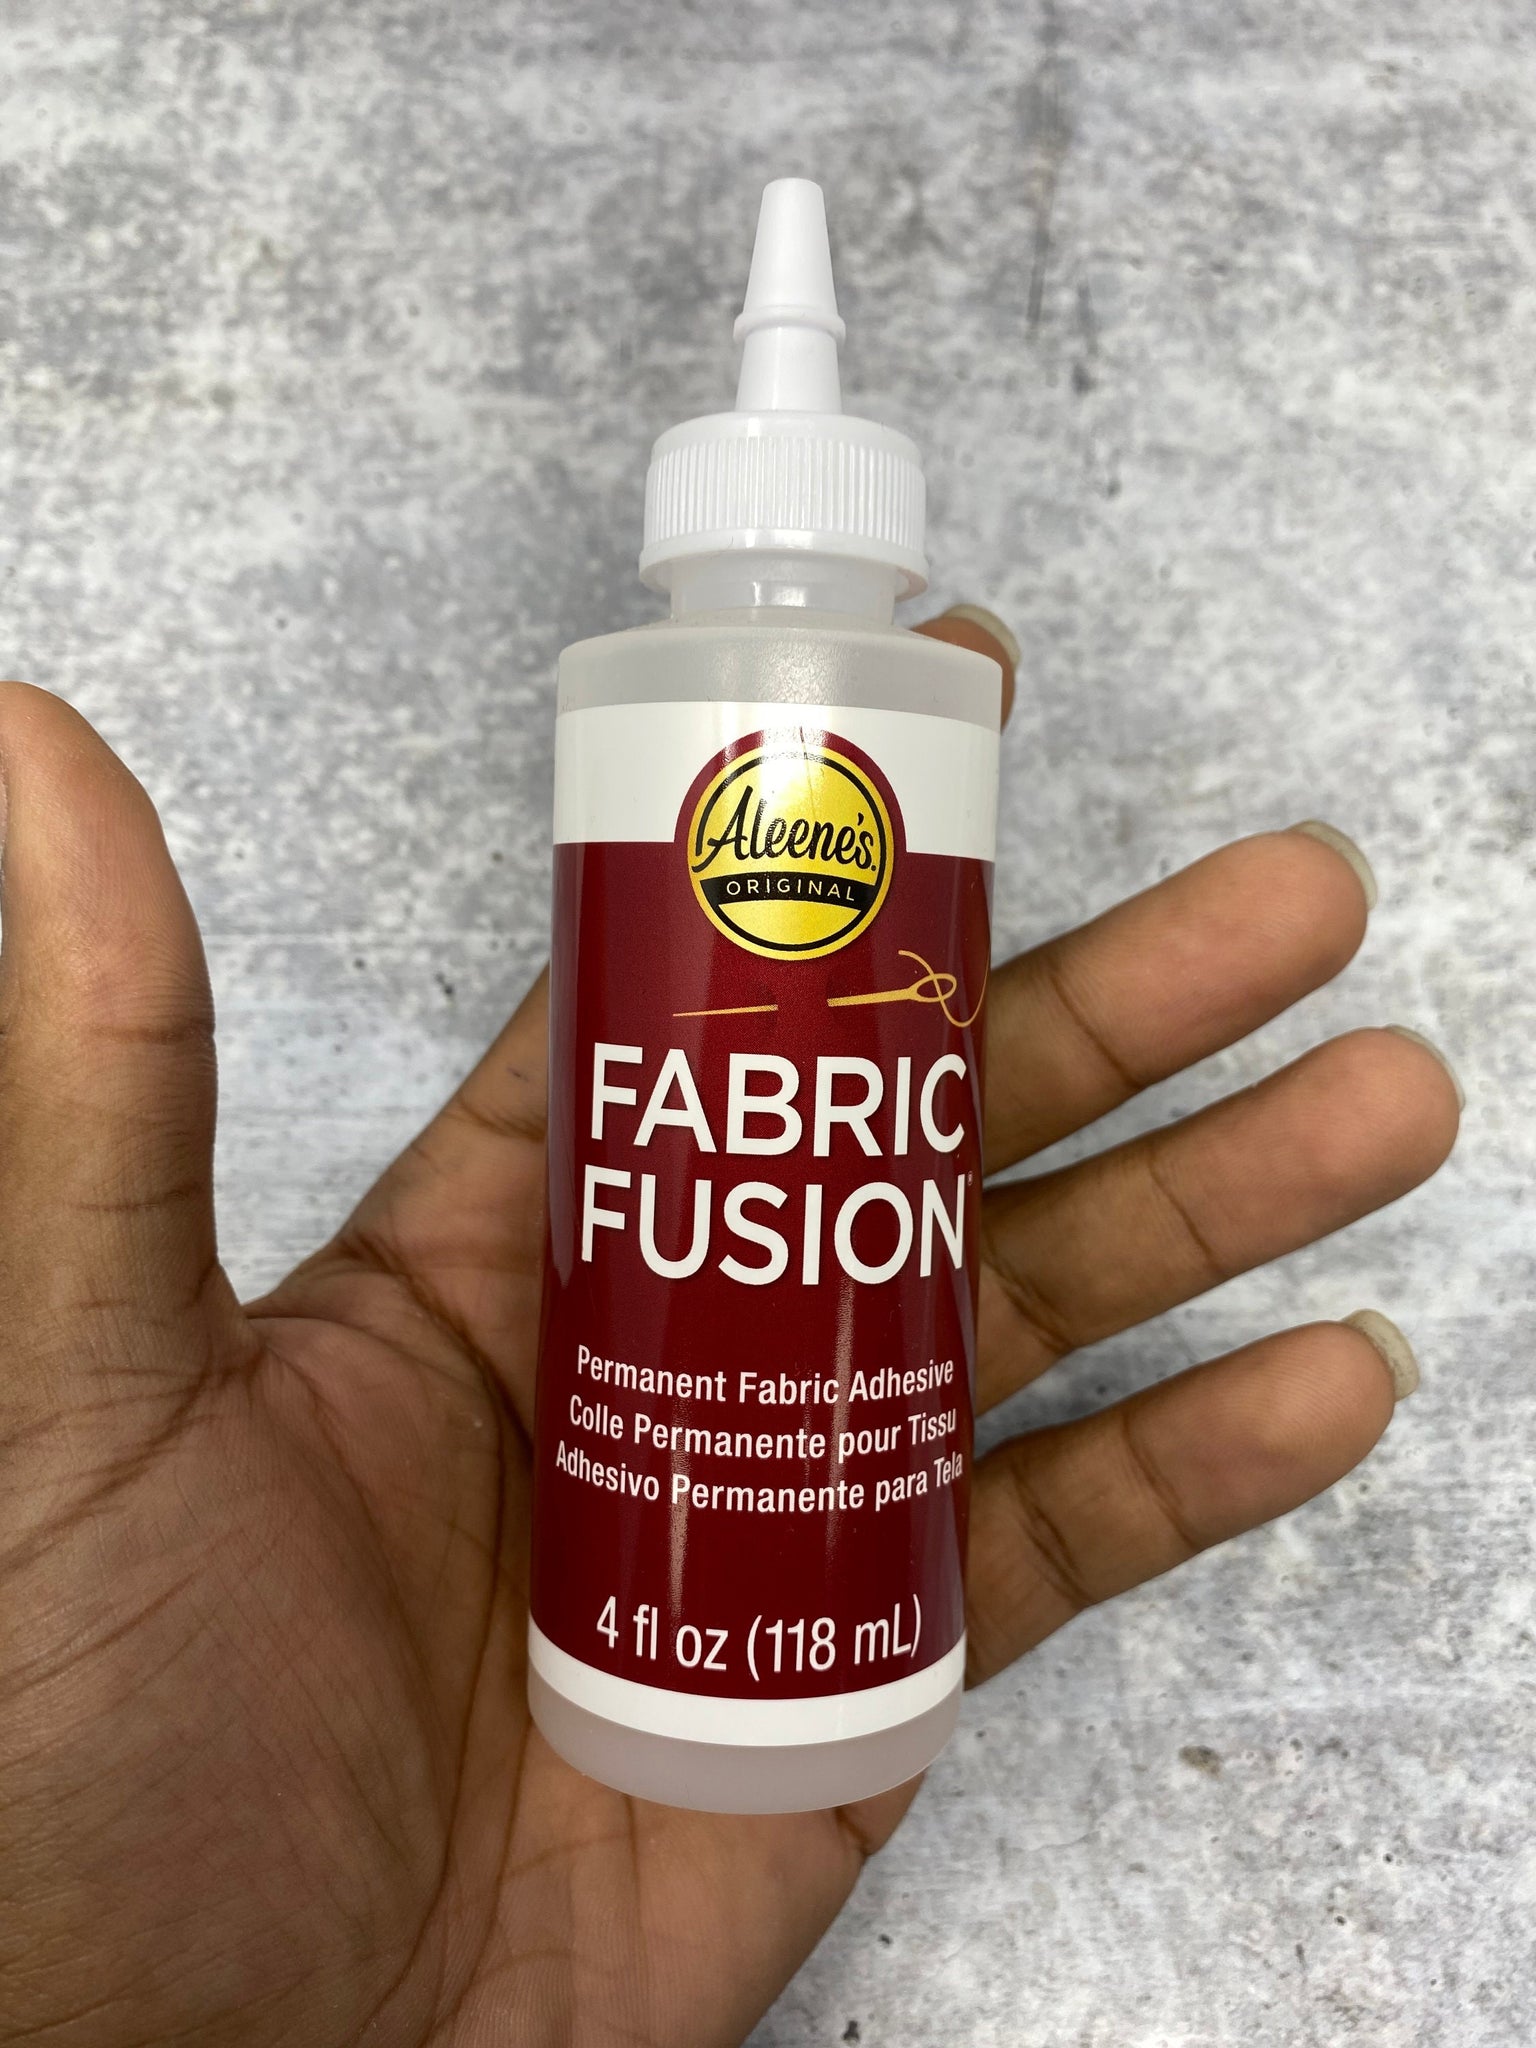 NEW, "Fabric Fusion", Permanent Fabric Adhesive, Great on clothing and other fabrics, Non-toxic, Dries Clear, Washable (4fl oz/118 mL)